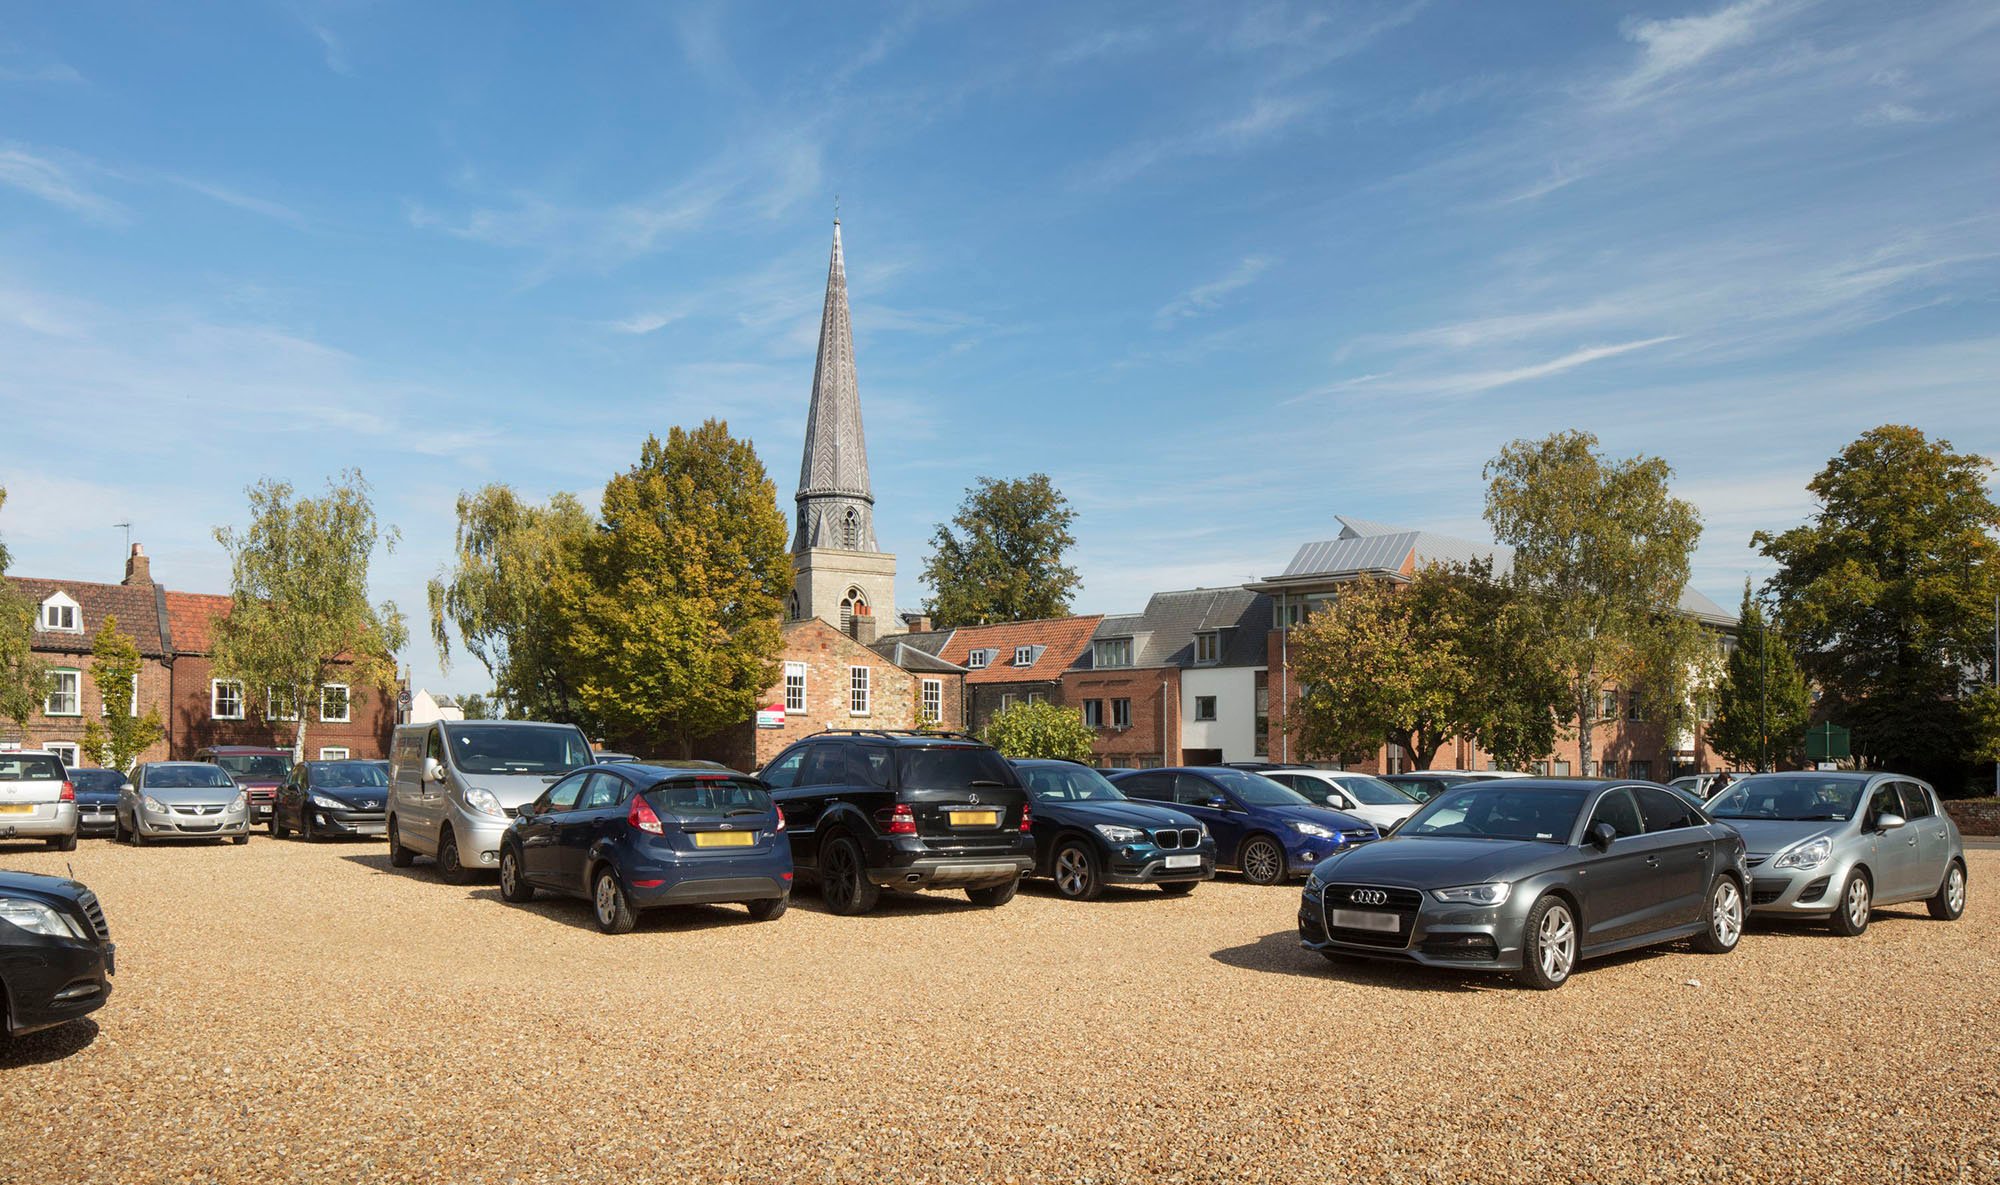 Cars parked in car park with church spire in background